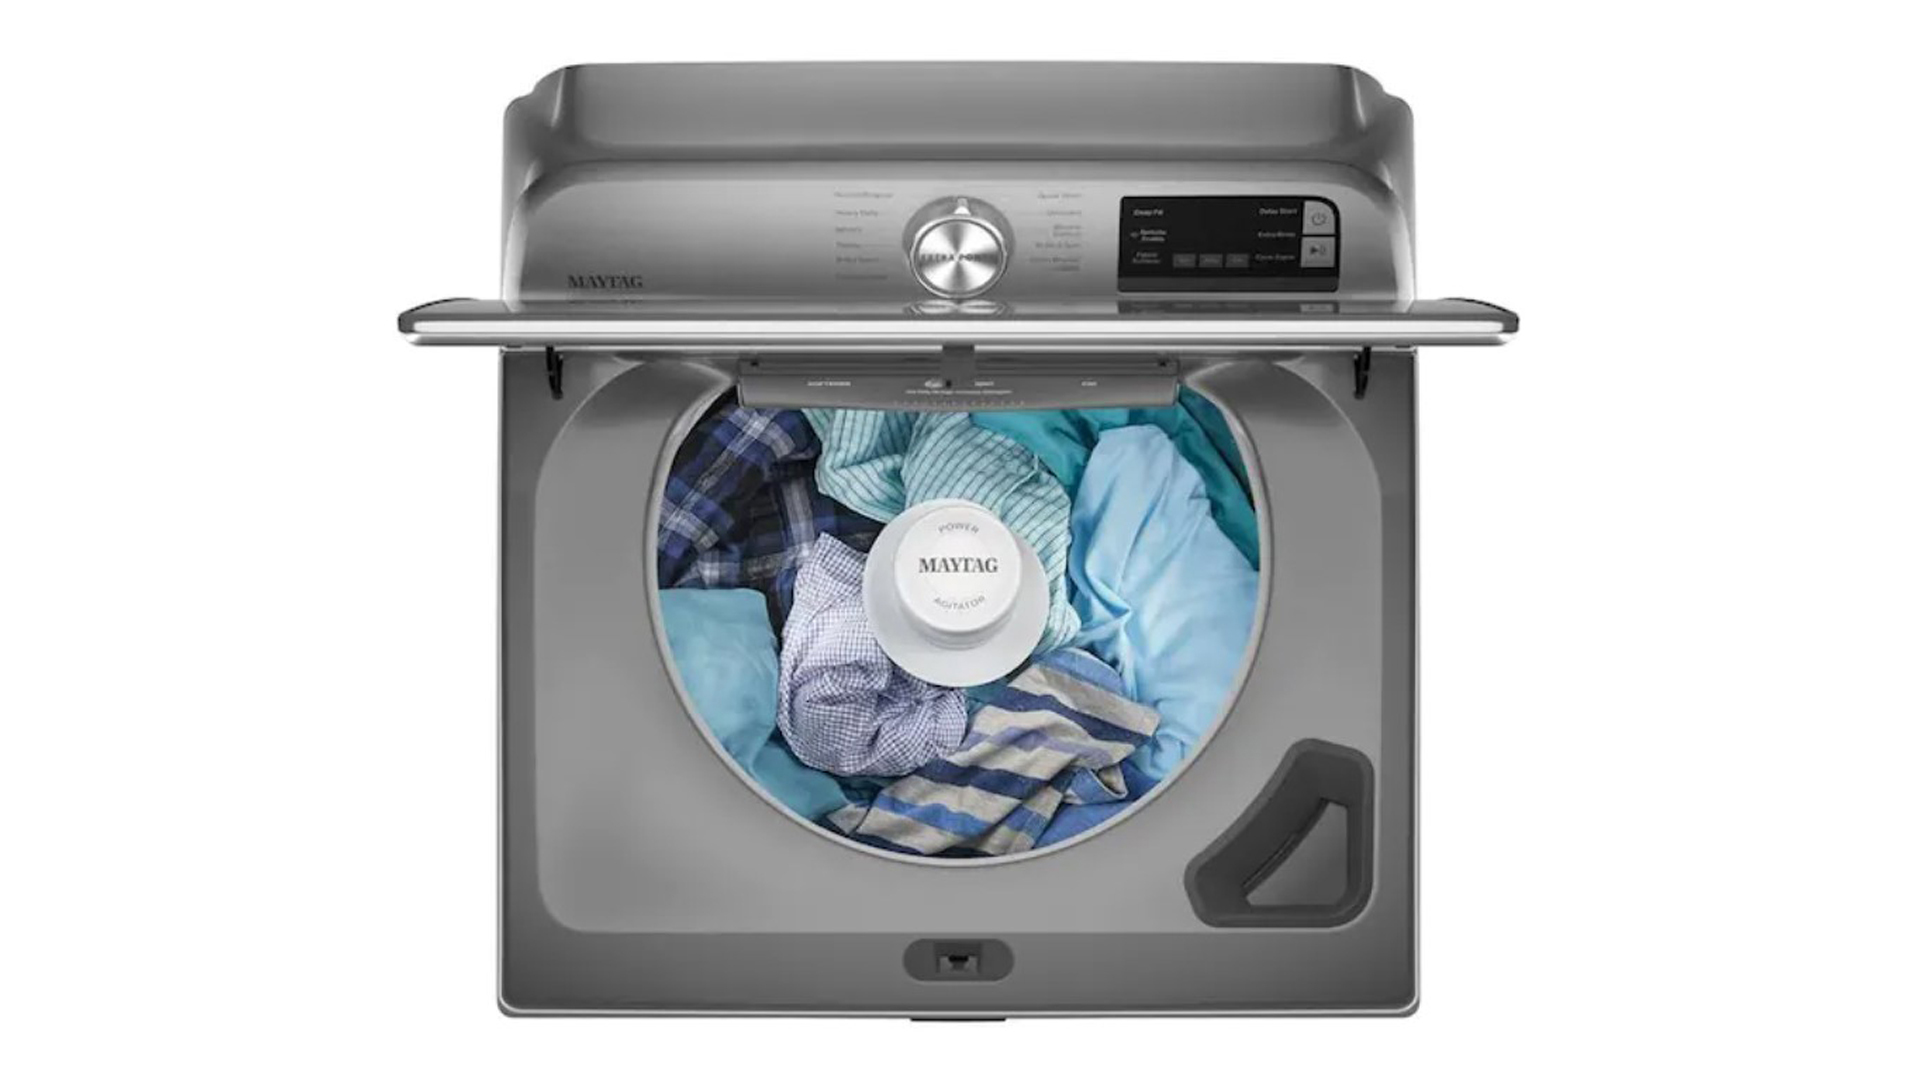 Maytag vs LG washers: Which washing machine brand comes out on top?